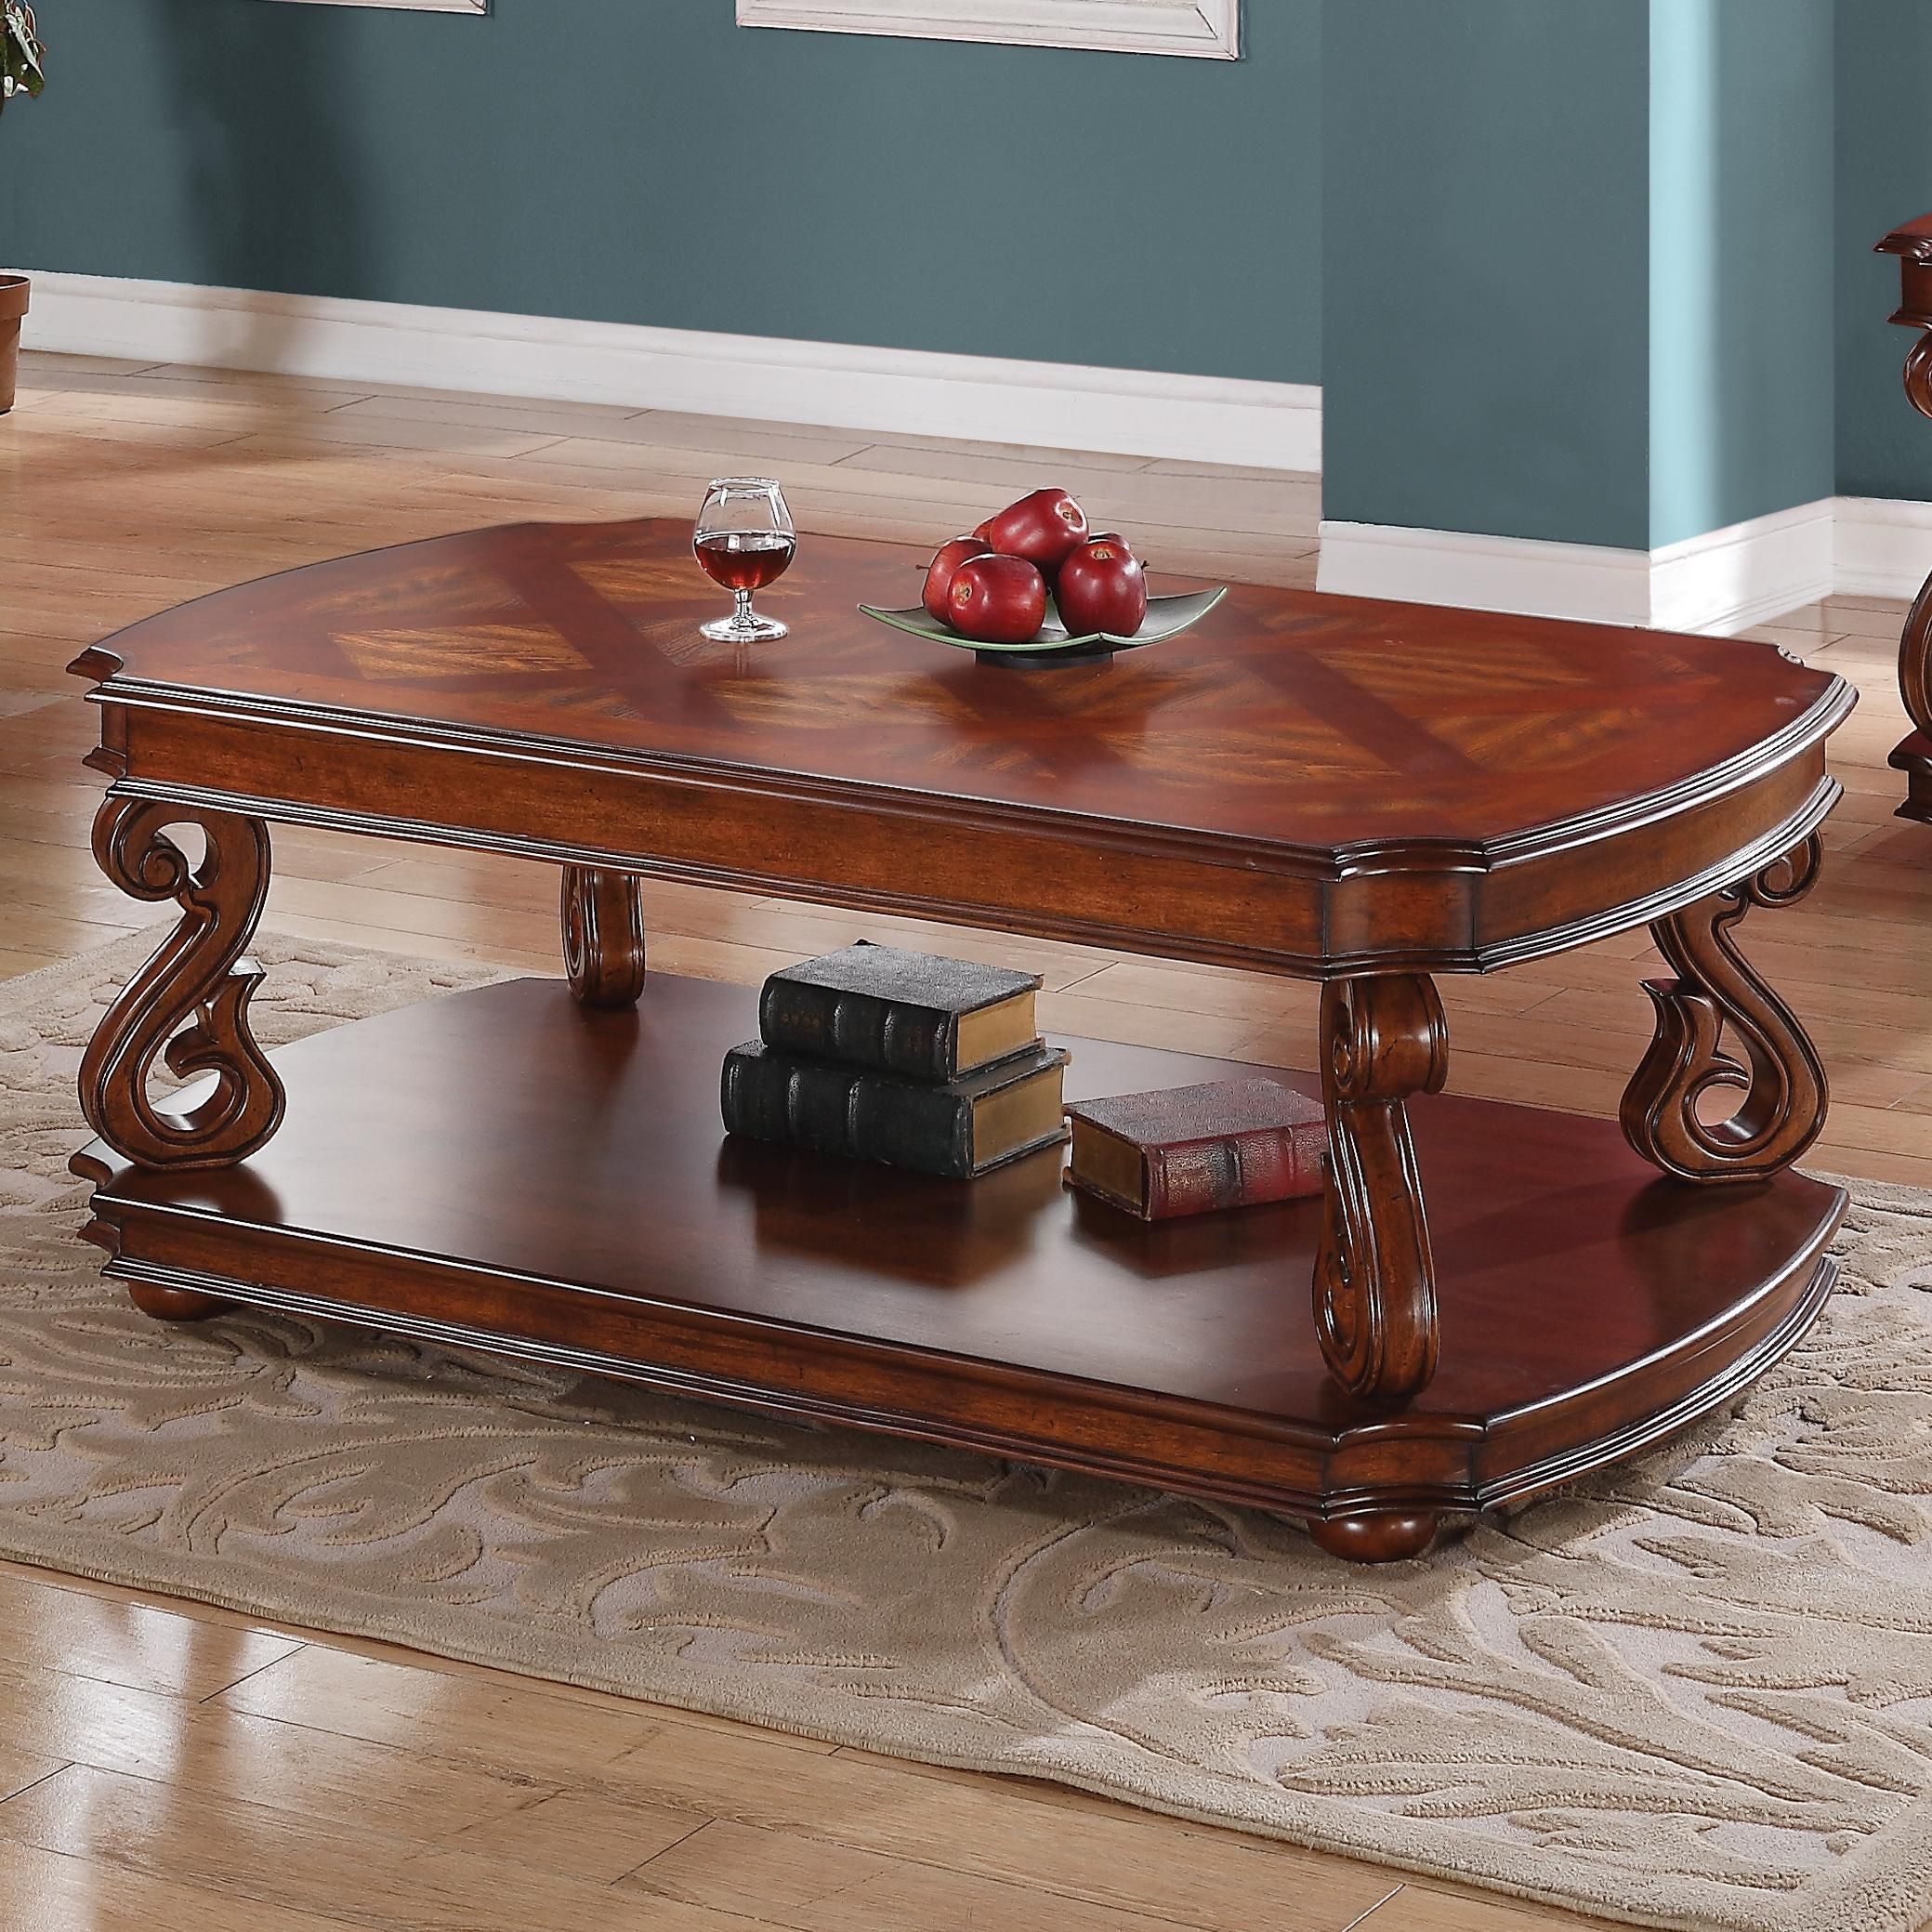 Occasional Group Traditional Coffee Table With Parquet Veneers In Dark  Cherry Finish | Quality Furniture At Affordable Prices In Philadelphia Main  Line Pa With Regard To Dark Cherry Coffee Tables (View 3 of 20)